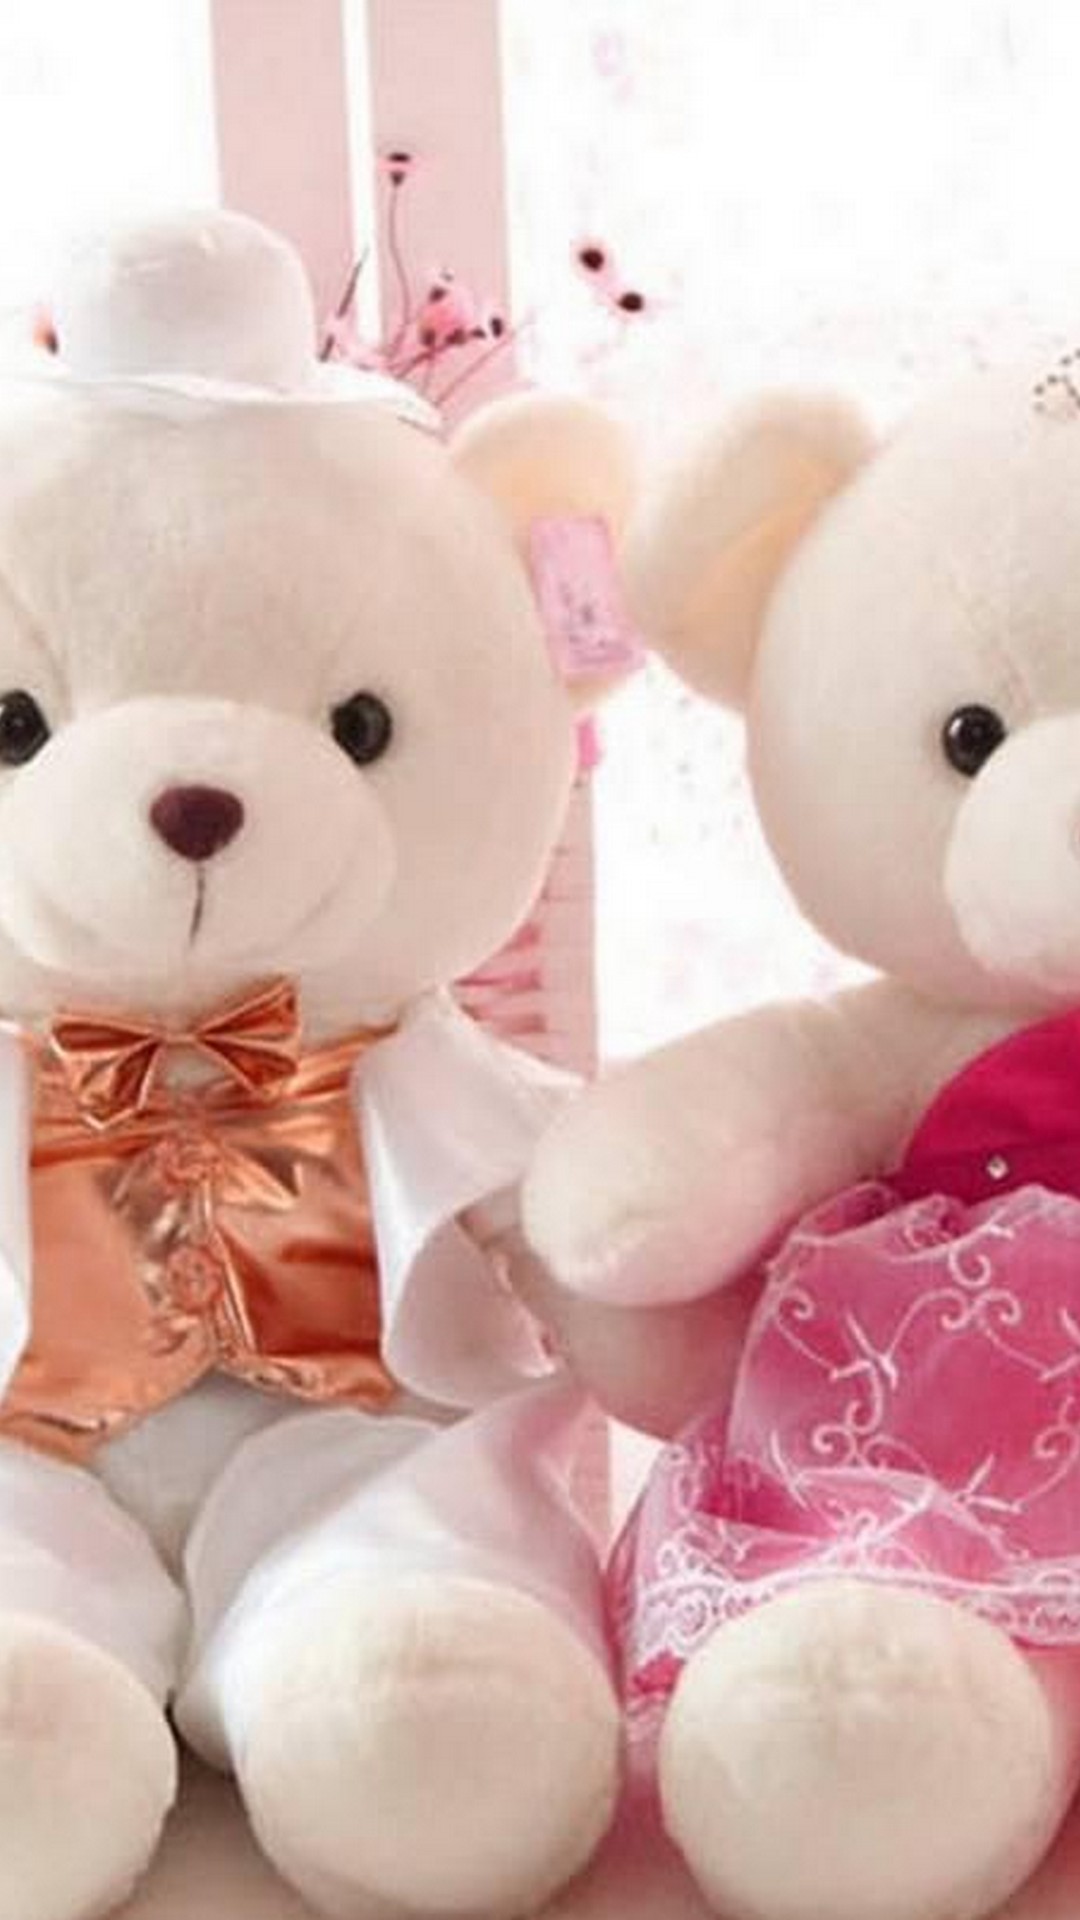 Cute Teddy Bear Wallpaper For Android - 2021 Android ...